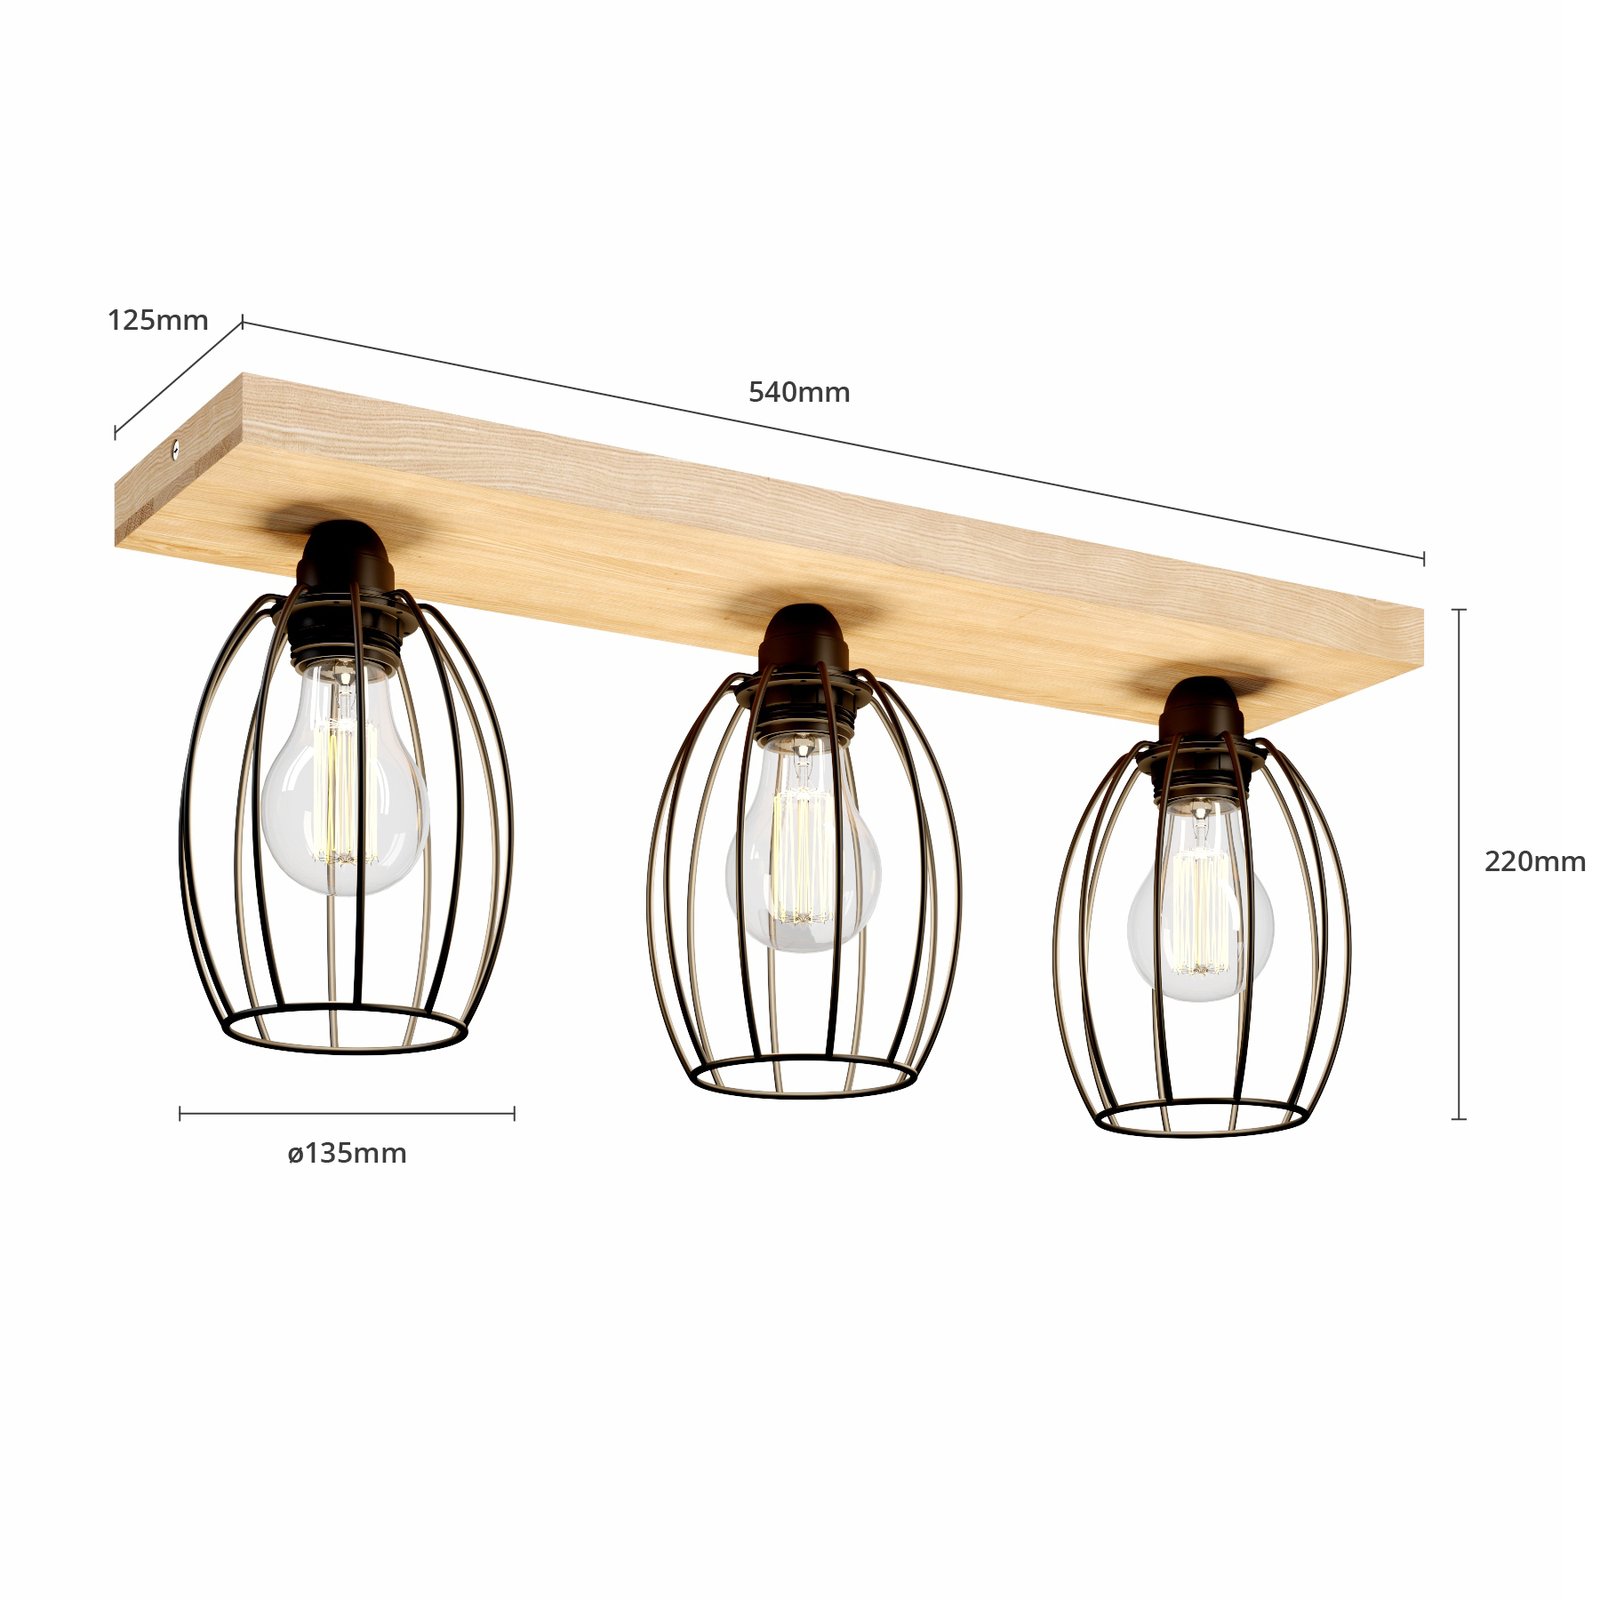 Beevly ceiling light, wood and metal, 3-bulb